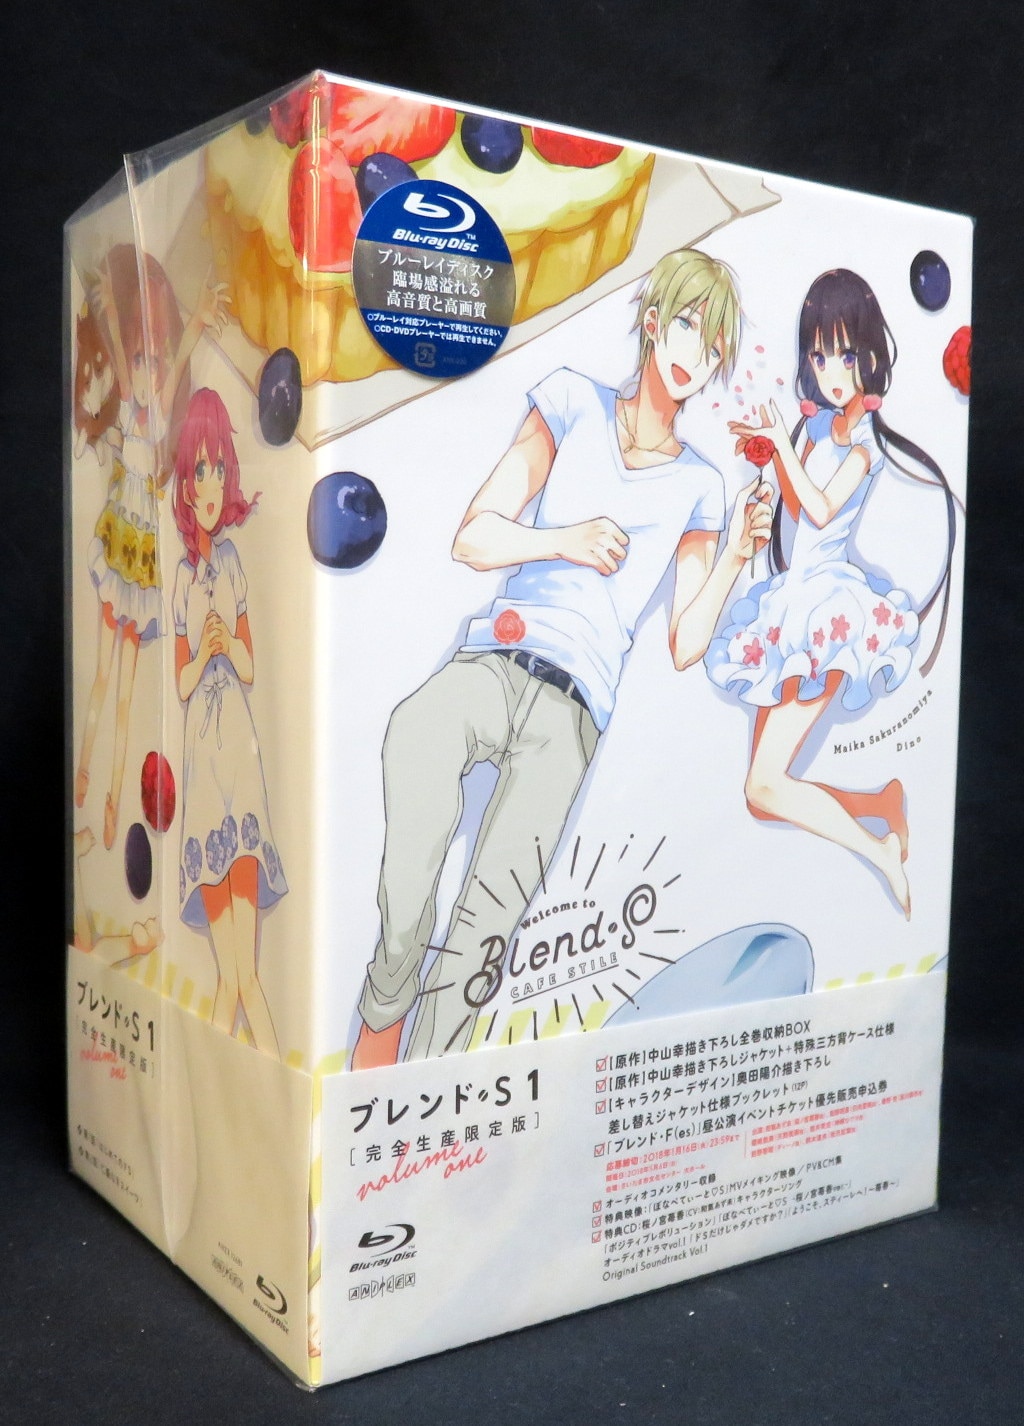 Anime Blu-Ray Unopened Limited Edition blend ・ S 1 Volume